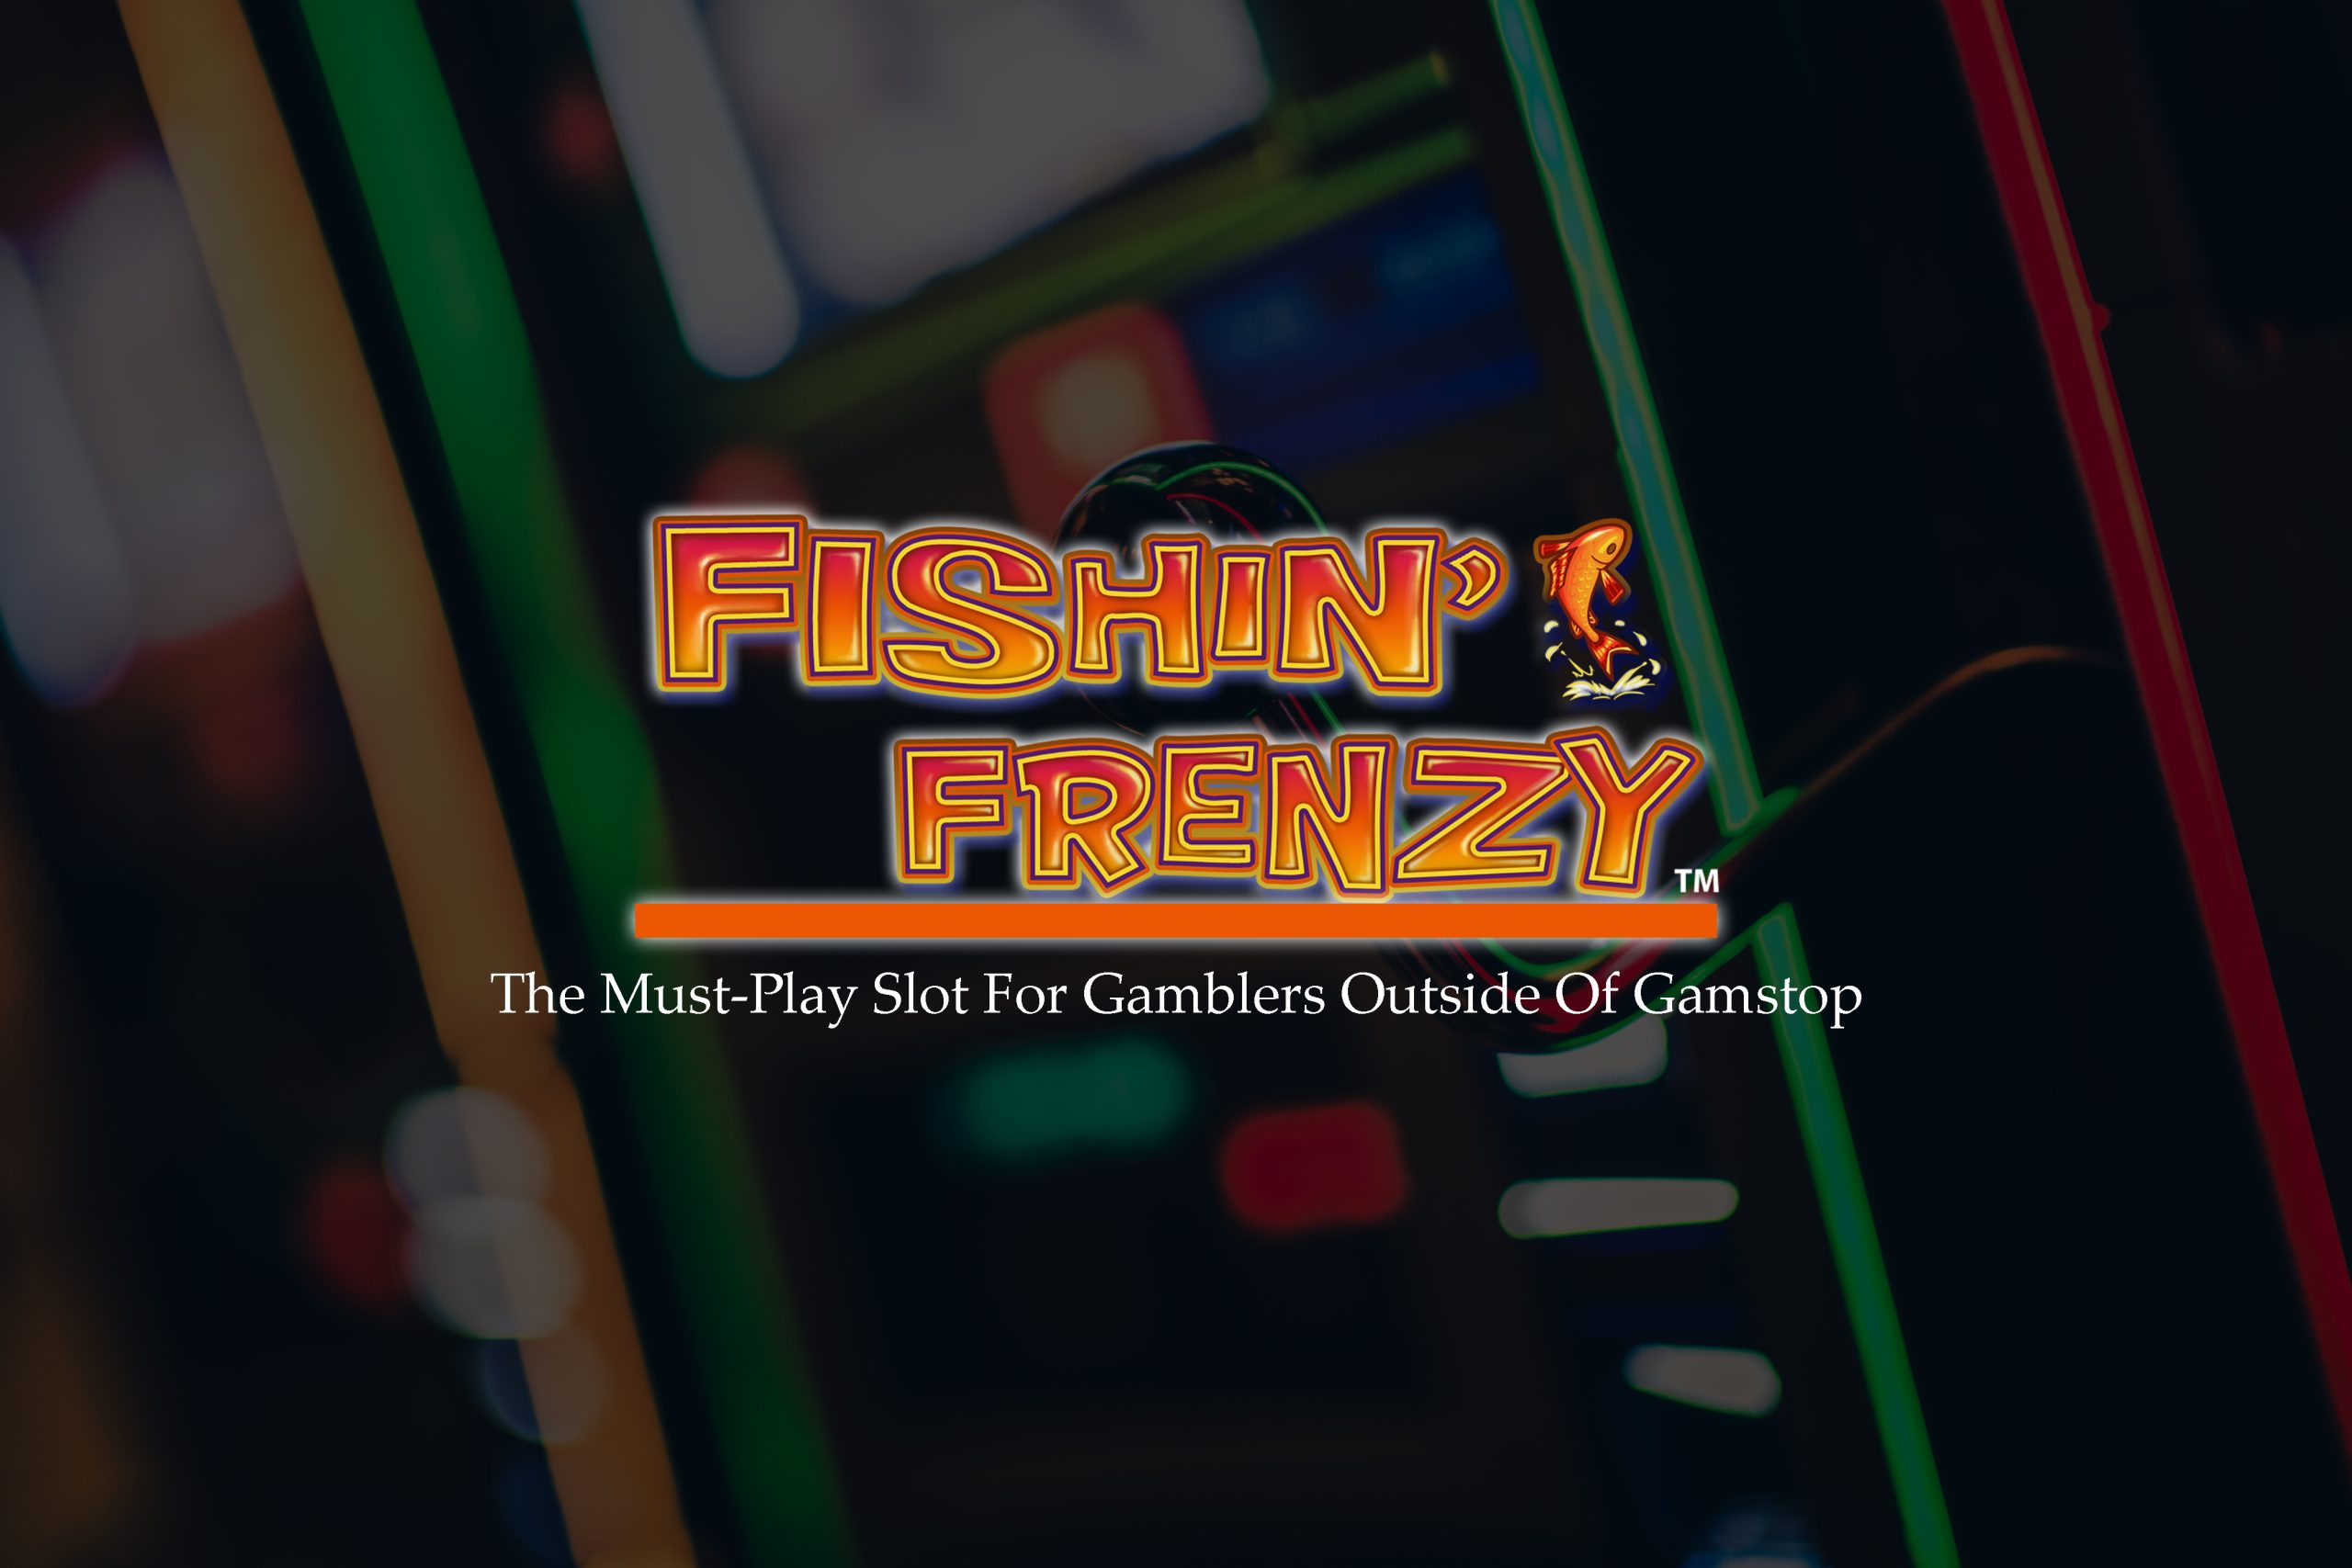 Fishin Frenzy: The Must-Play Slot For Gamblers Outside Of Gamstop